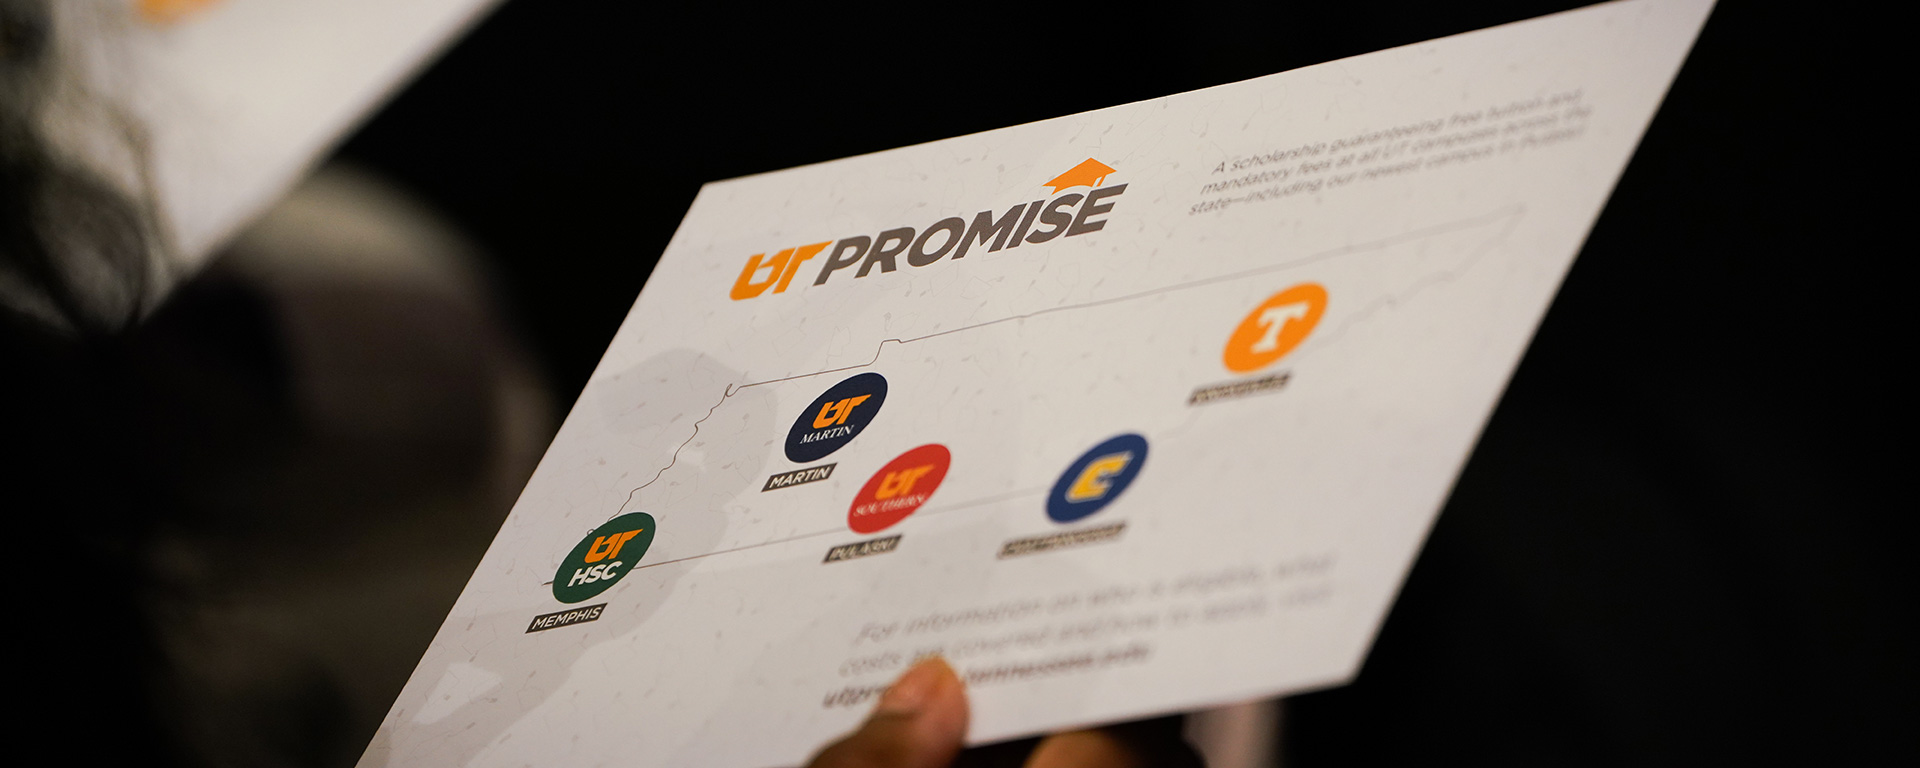 UT Promise postcard showing a map of all UT campuses across Tennessee.